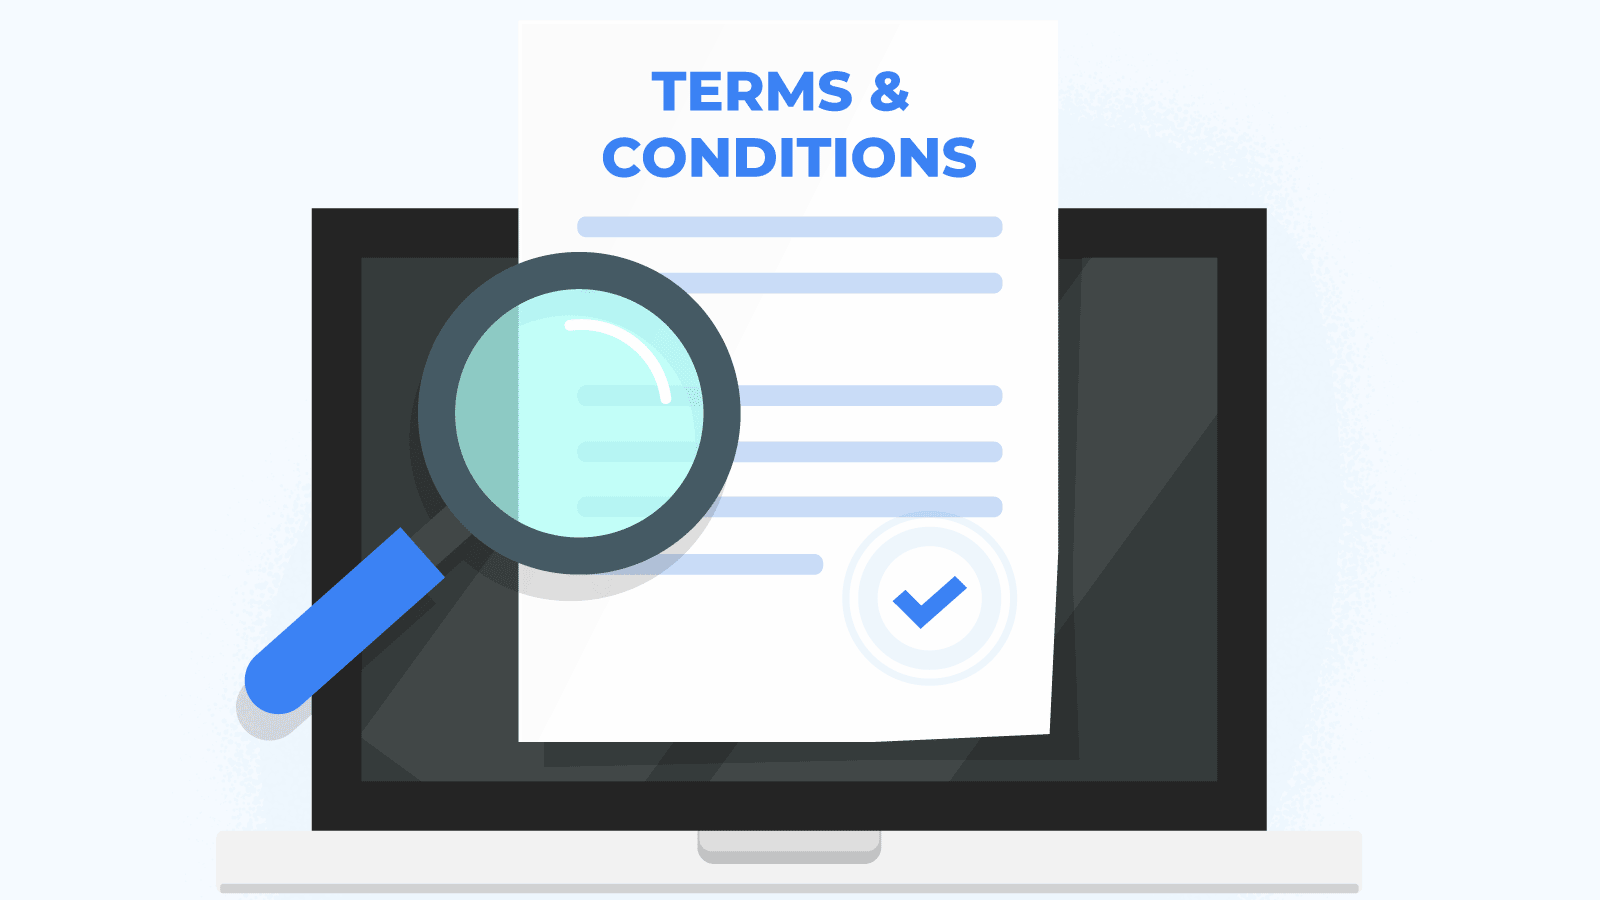 Access the Terms and Conditions